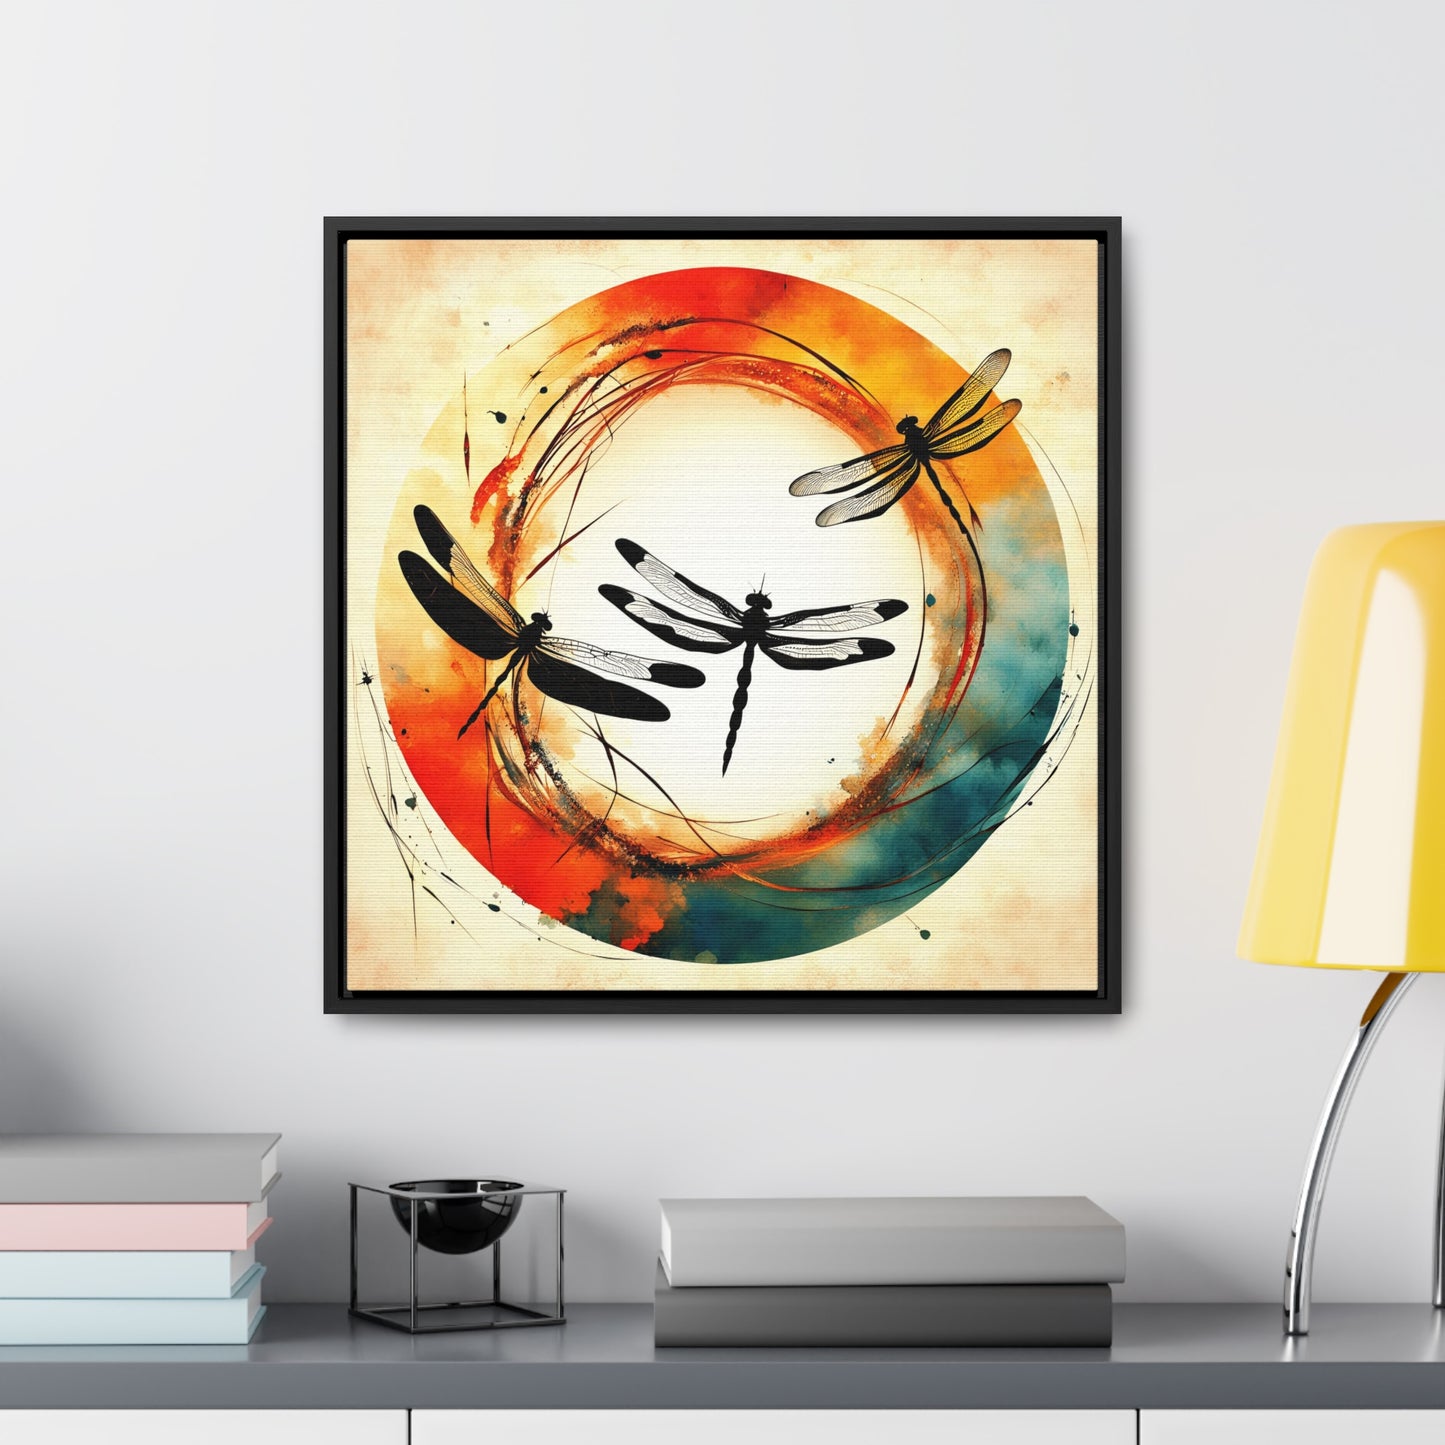 Dragonflies Silhouettes in a colorful Enso circle Print on Canvas in a Floating Frame - Spiritual and Meditation Wall Decor